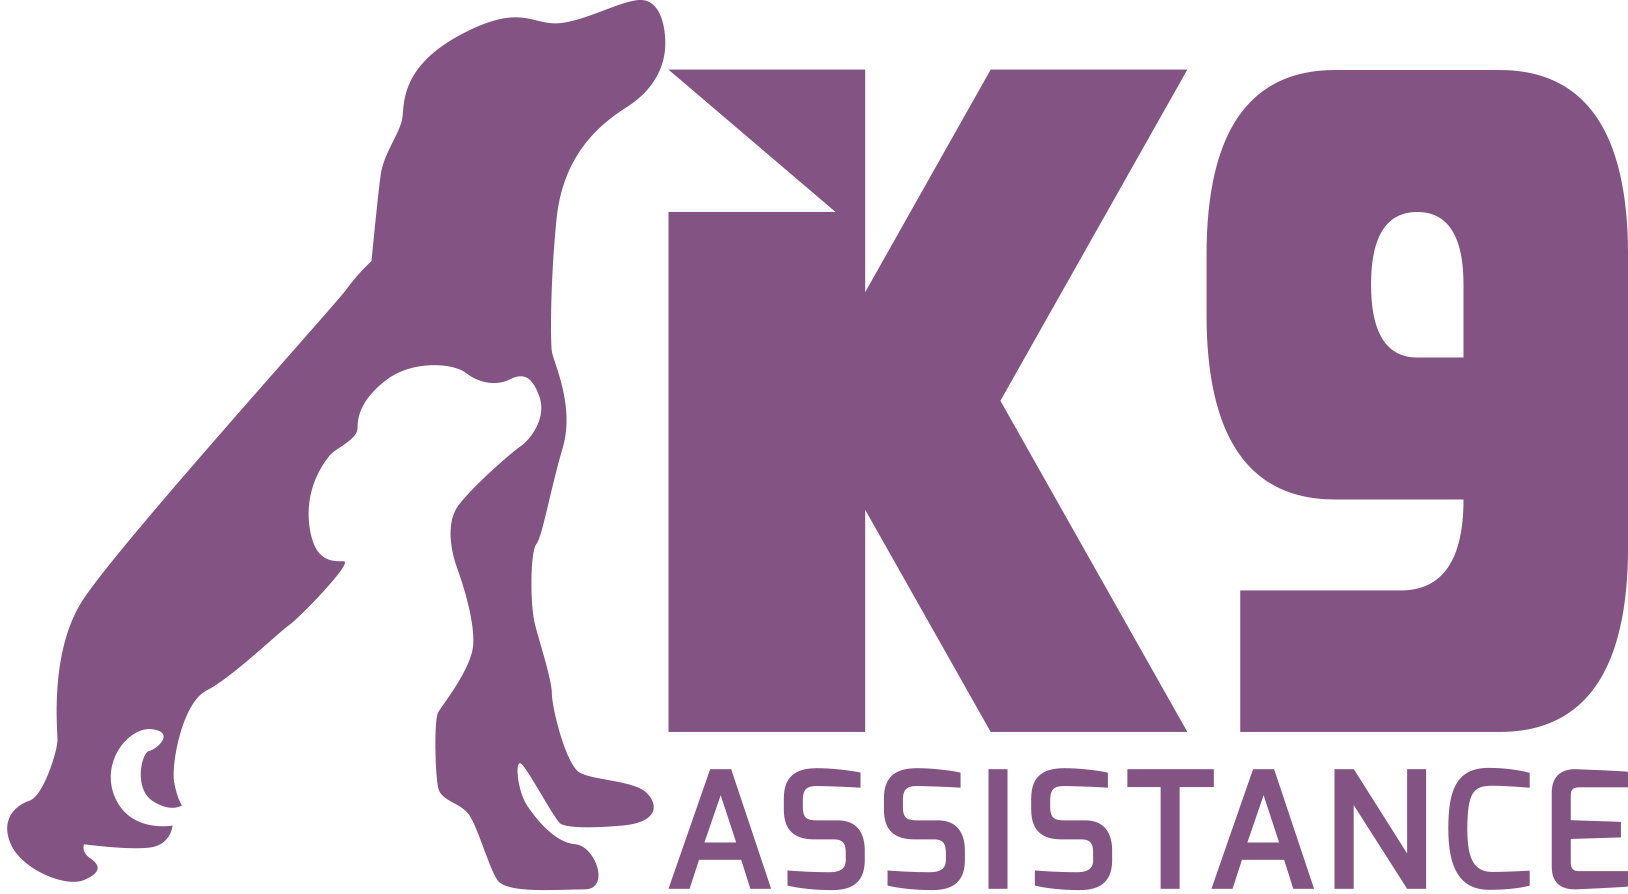 Company logo for K9assistance (limited)